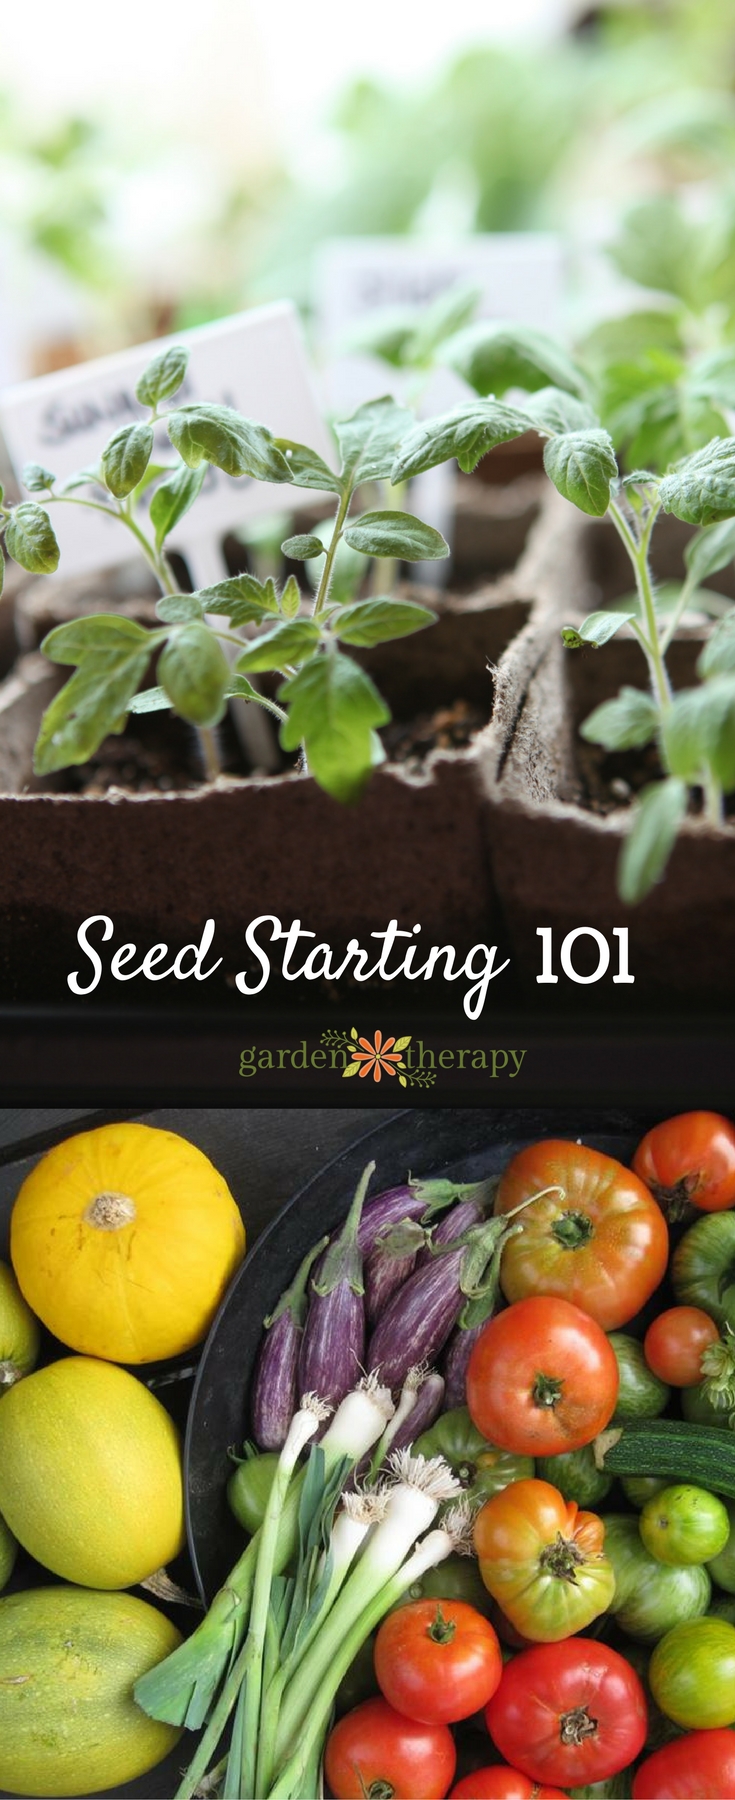 Seed starting 101 the basics for home seed starting